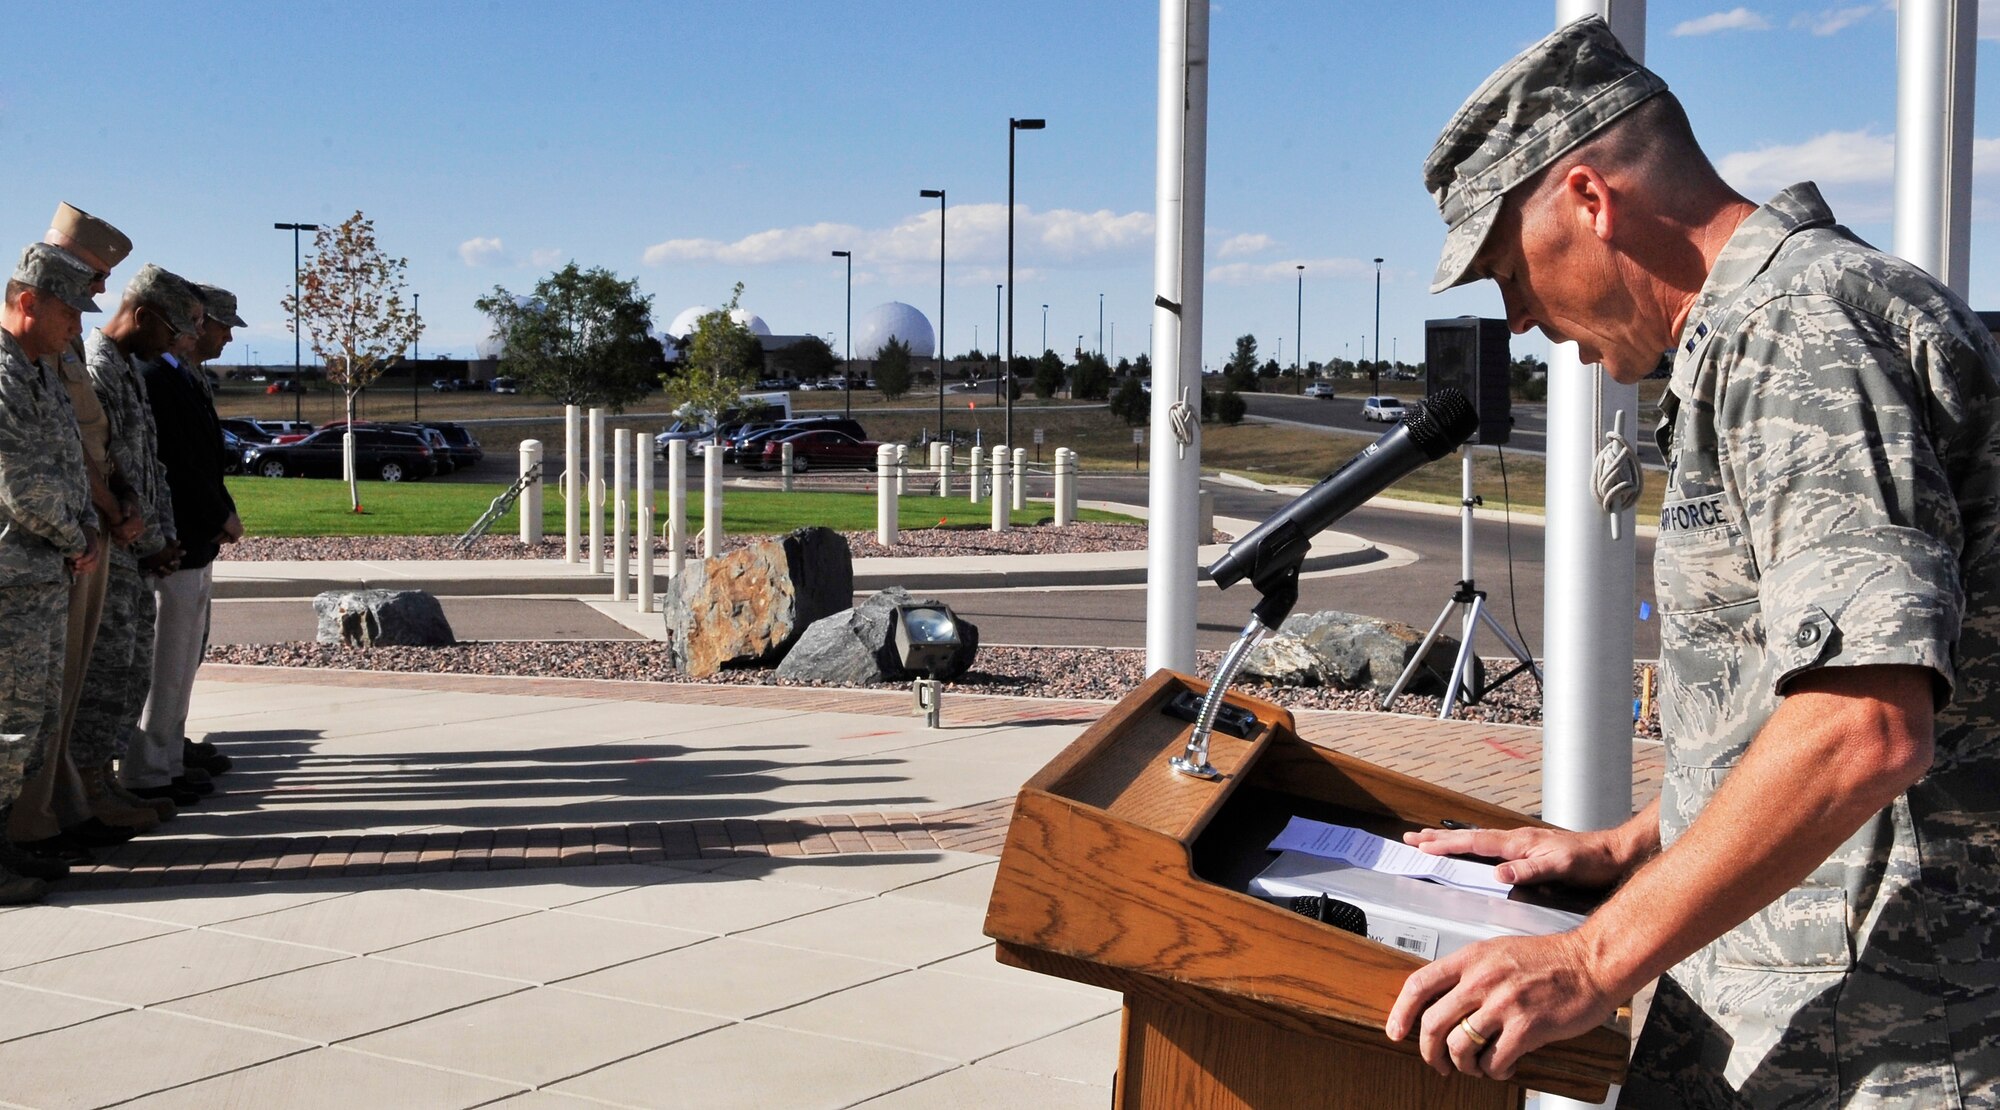 BUCKLEY AIR FORCE BASE, Colo. -- Capt. Randy Croft, 460th Space Wing Chaplain, gives the invocation during a Patriot Day ceremony.The United States flag was lowered to half-staff in remembrance of the lives lost in 2001. (U.S. Air Force photo by Airman 1st Class Paul Labbe)

